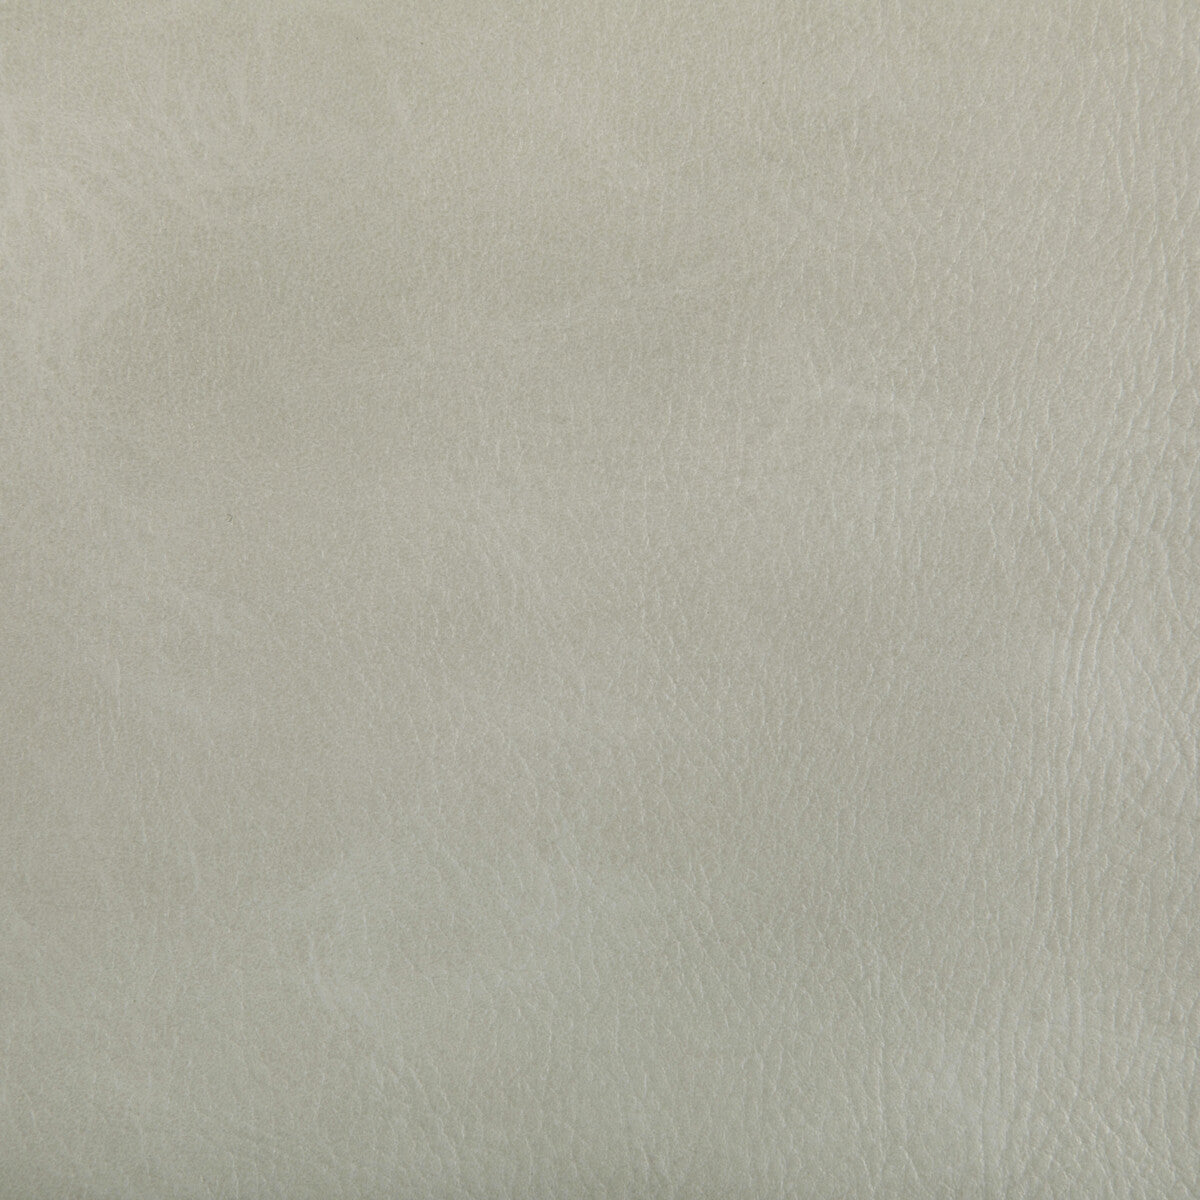 Toni fabric in limestone color - pattern TONI.101.0 - by Kravet Contract